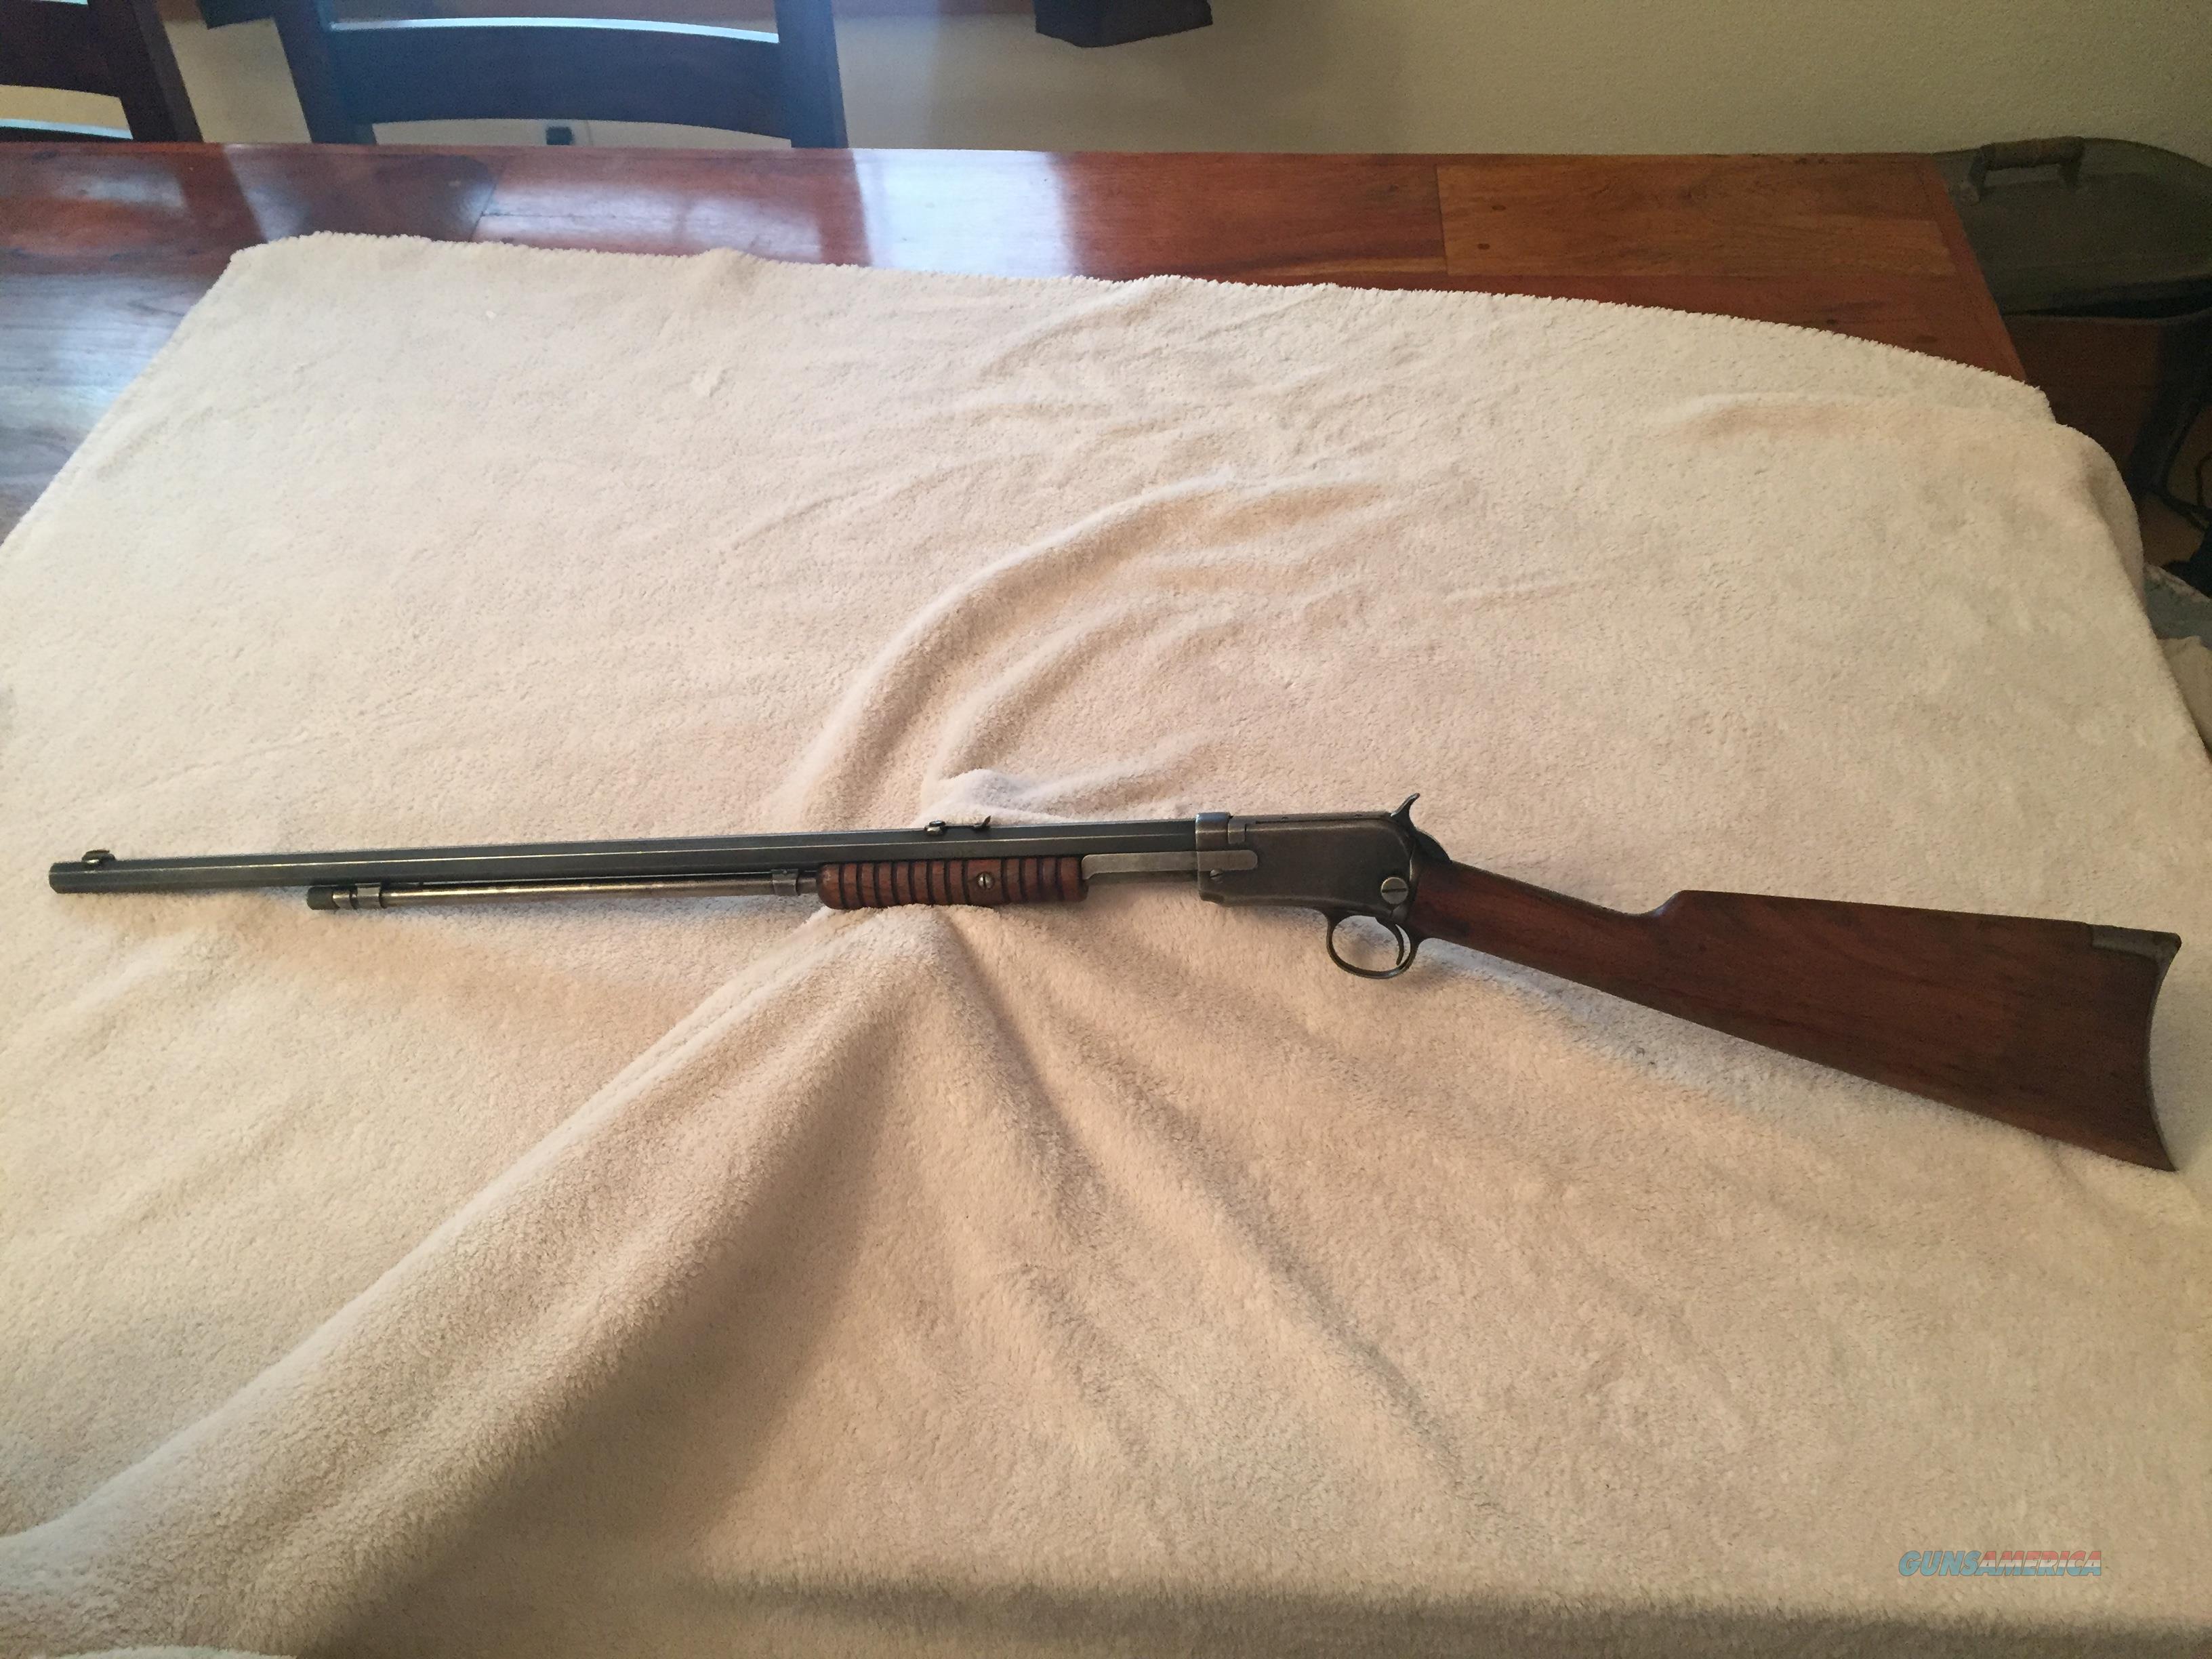 winchester model 1890 serial number